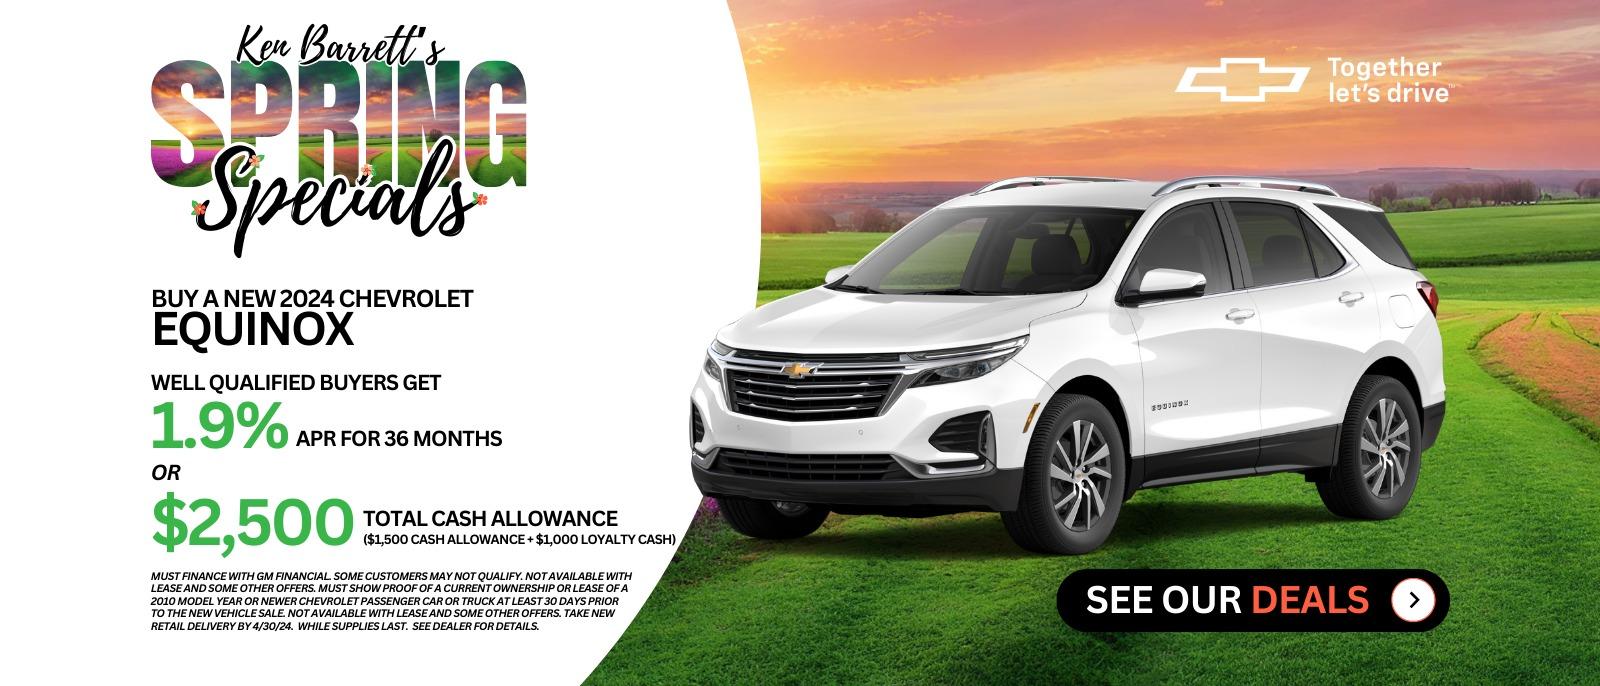 Ken Barrett's Spring Specials new deals on new Chevrolets in Batavia NY.  Find the Chevy deal for you.  Check out the new car deal on this brand new Chevrolet Equinox